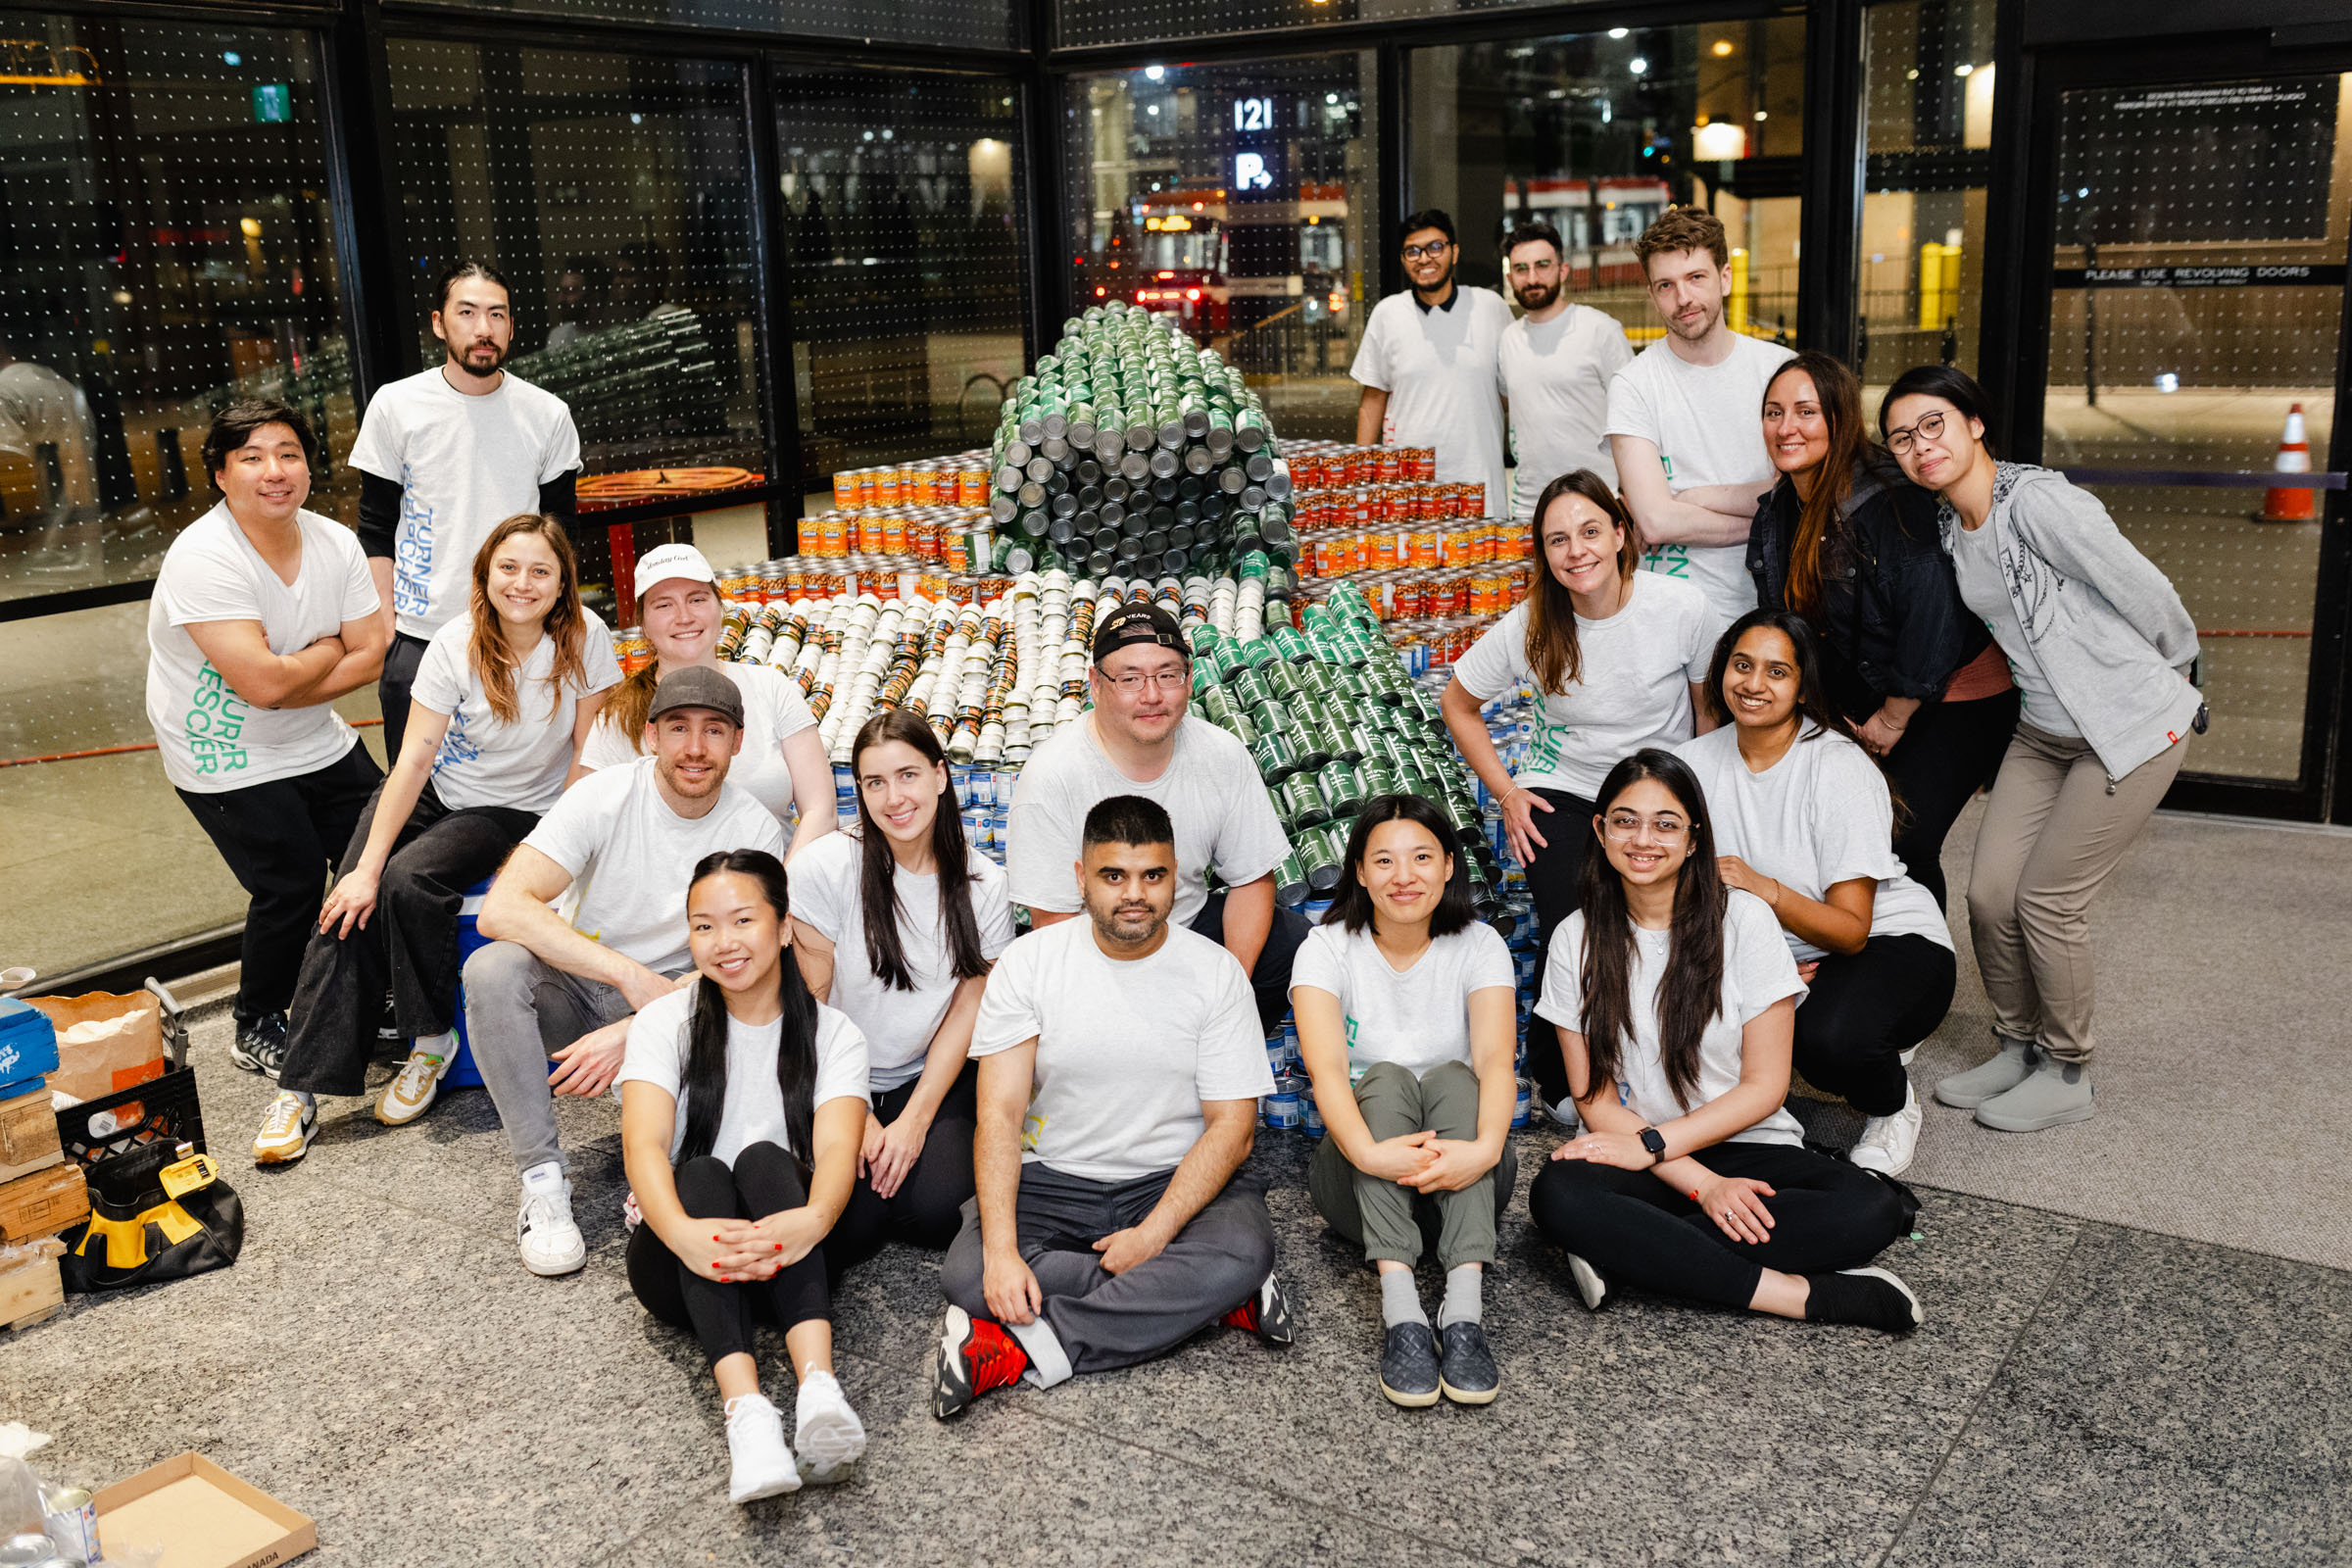 A group of people in white shirts pose together for event photography in front of a large sculpture made of canned goods inside a building.